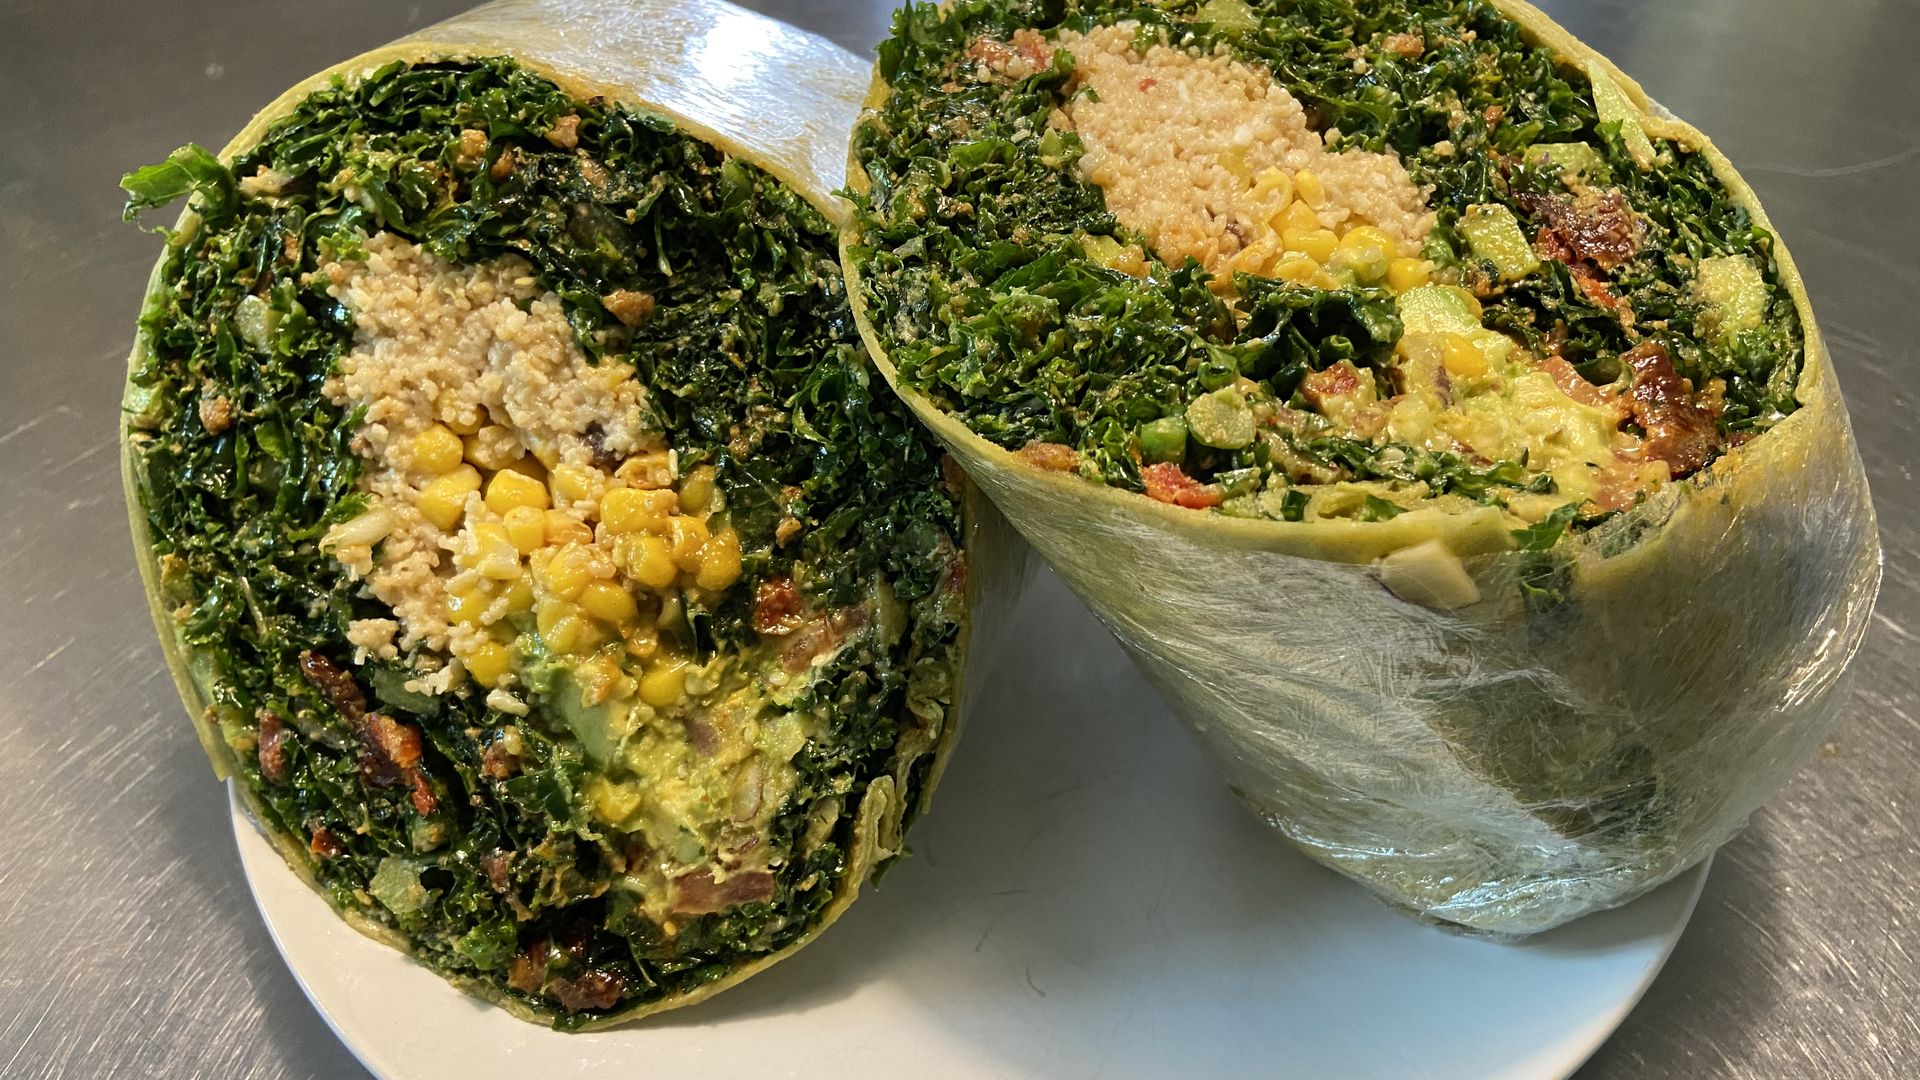 A massive spinach wrap stuffed with raw food like garlicky kale, coconut corn, spices and more